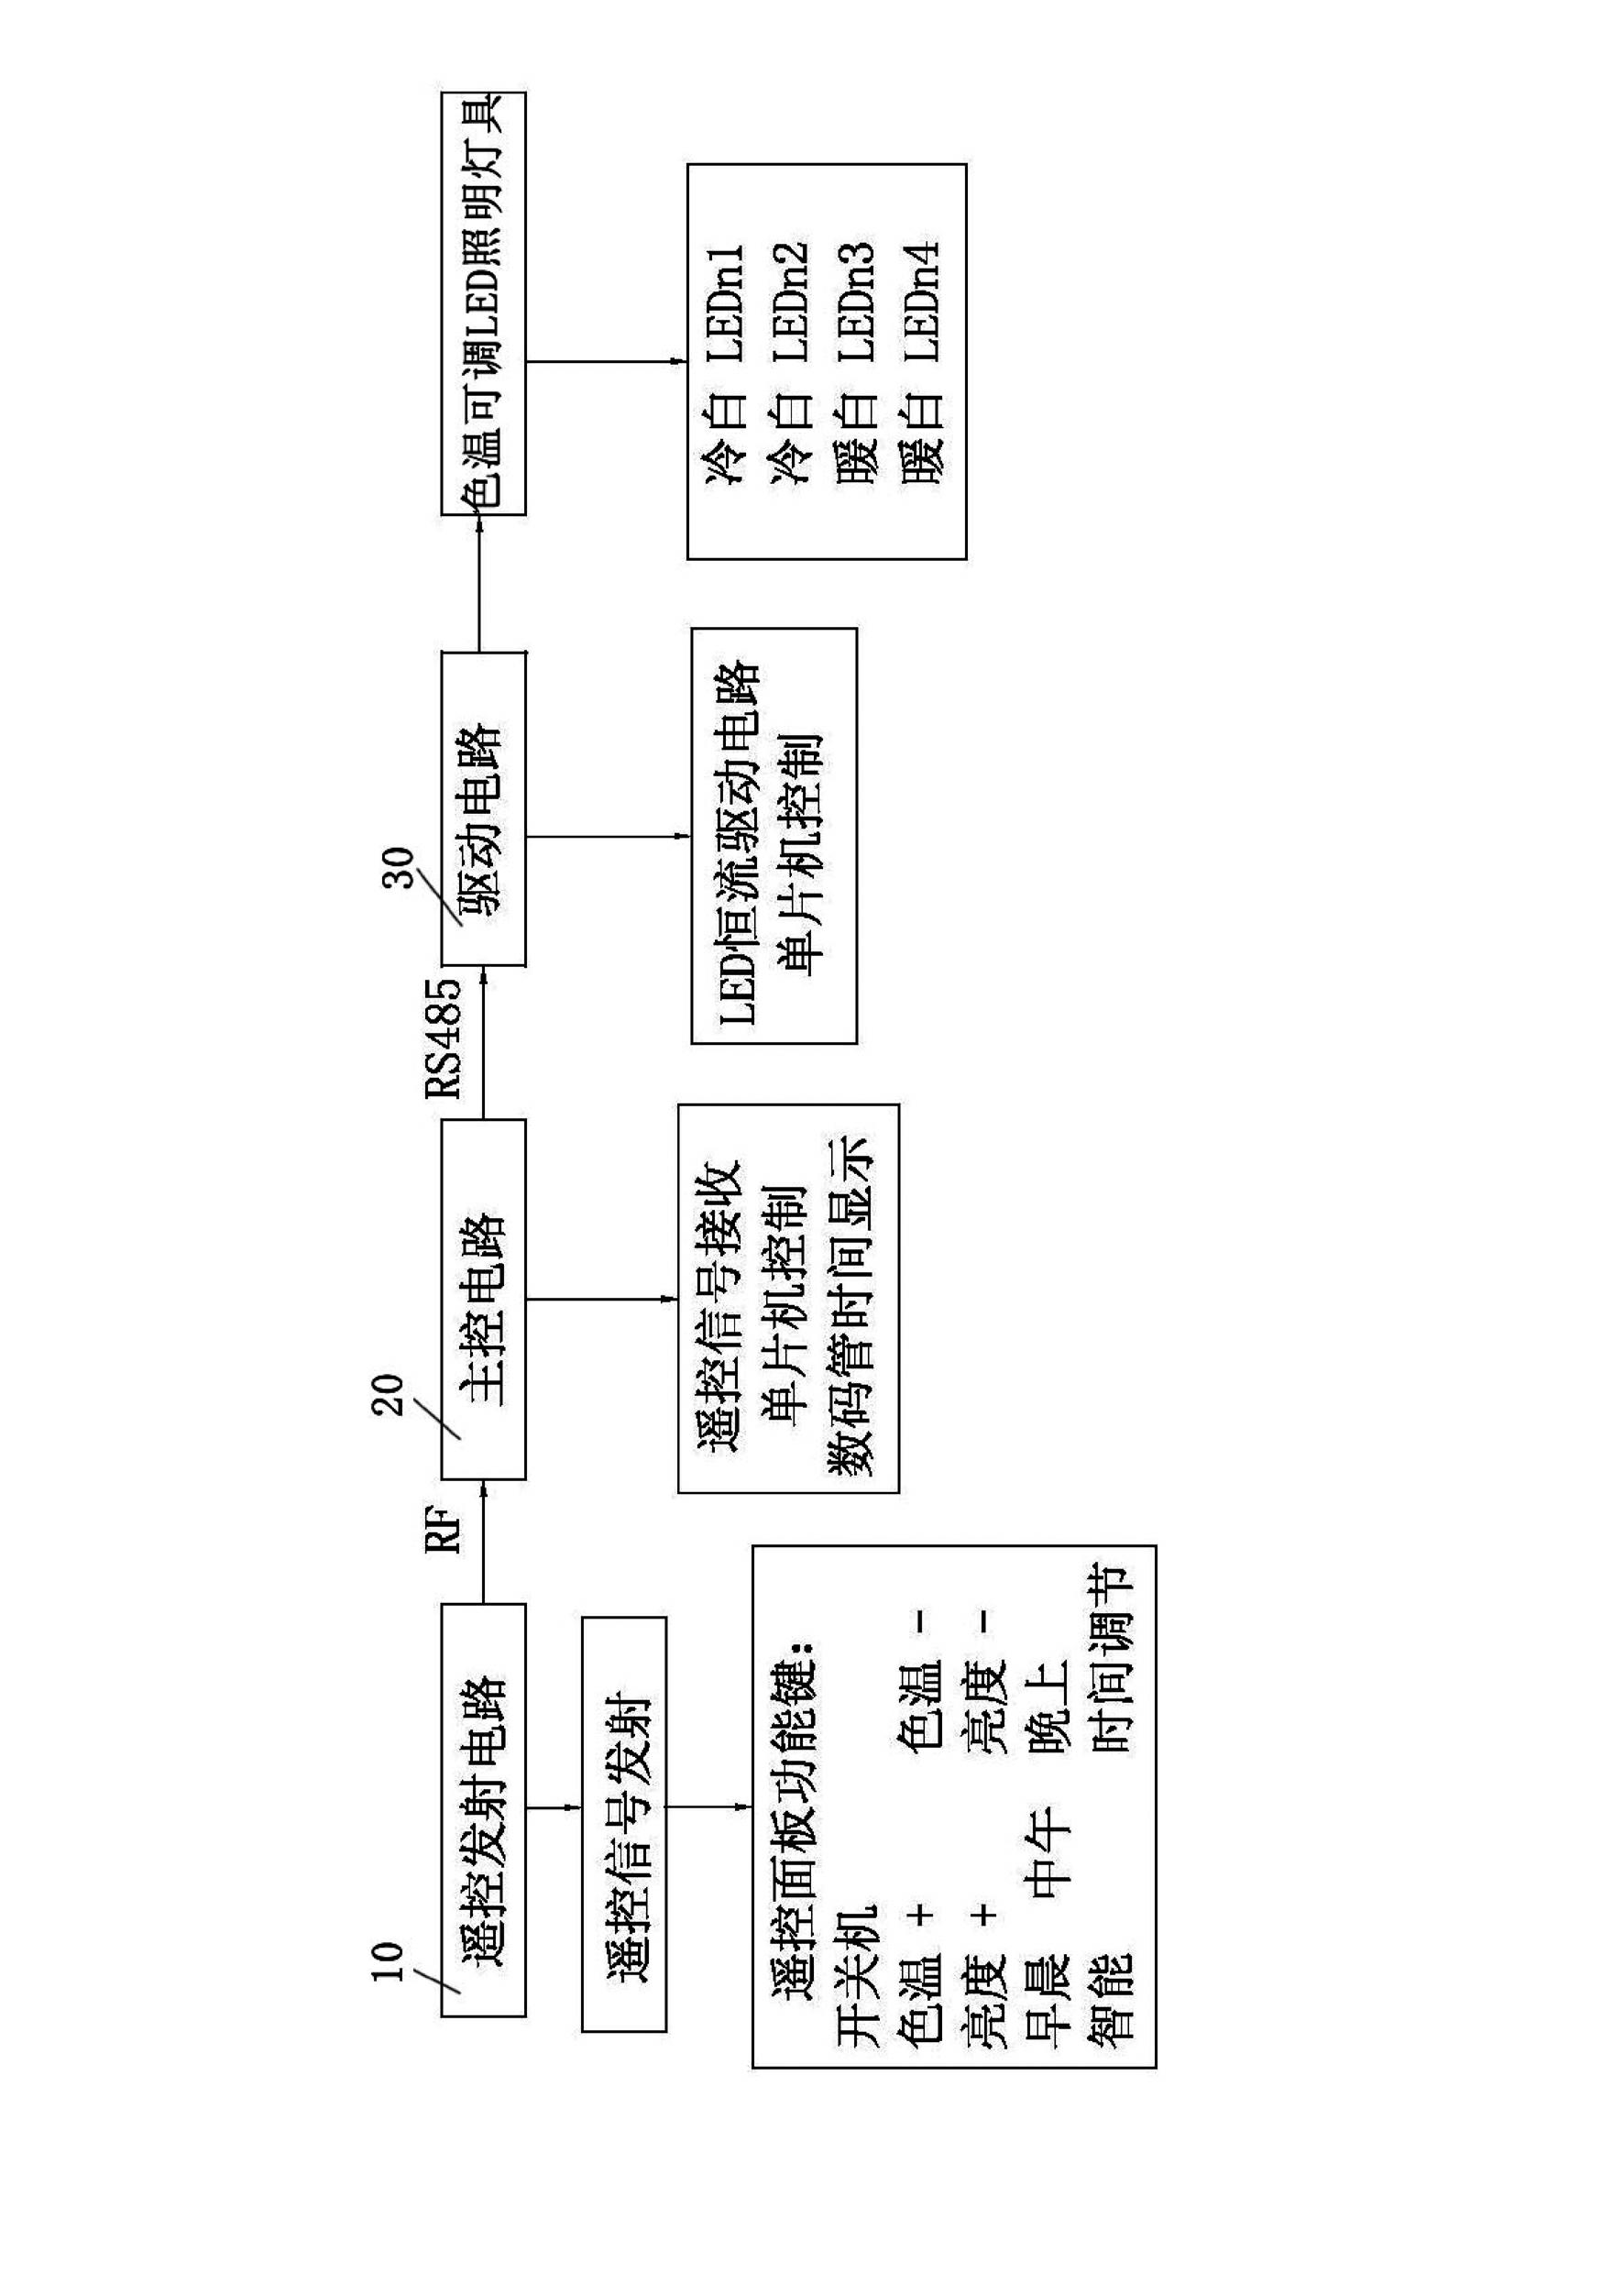 Lighting lamp control device and lighting system